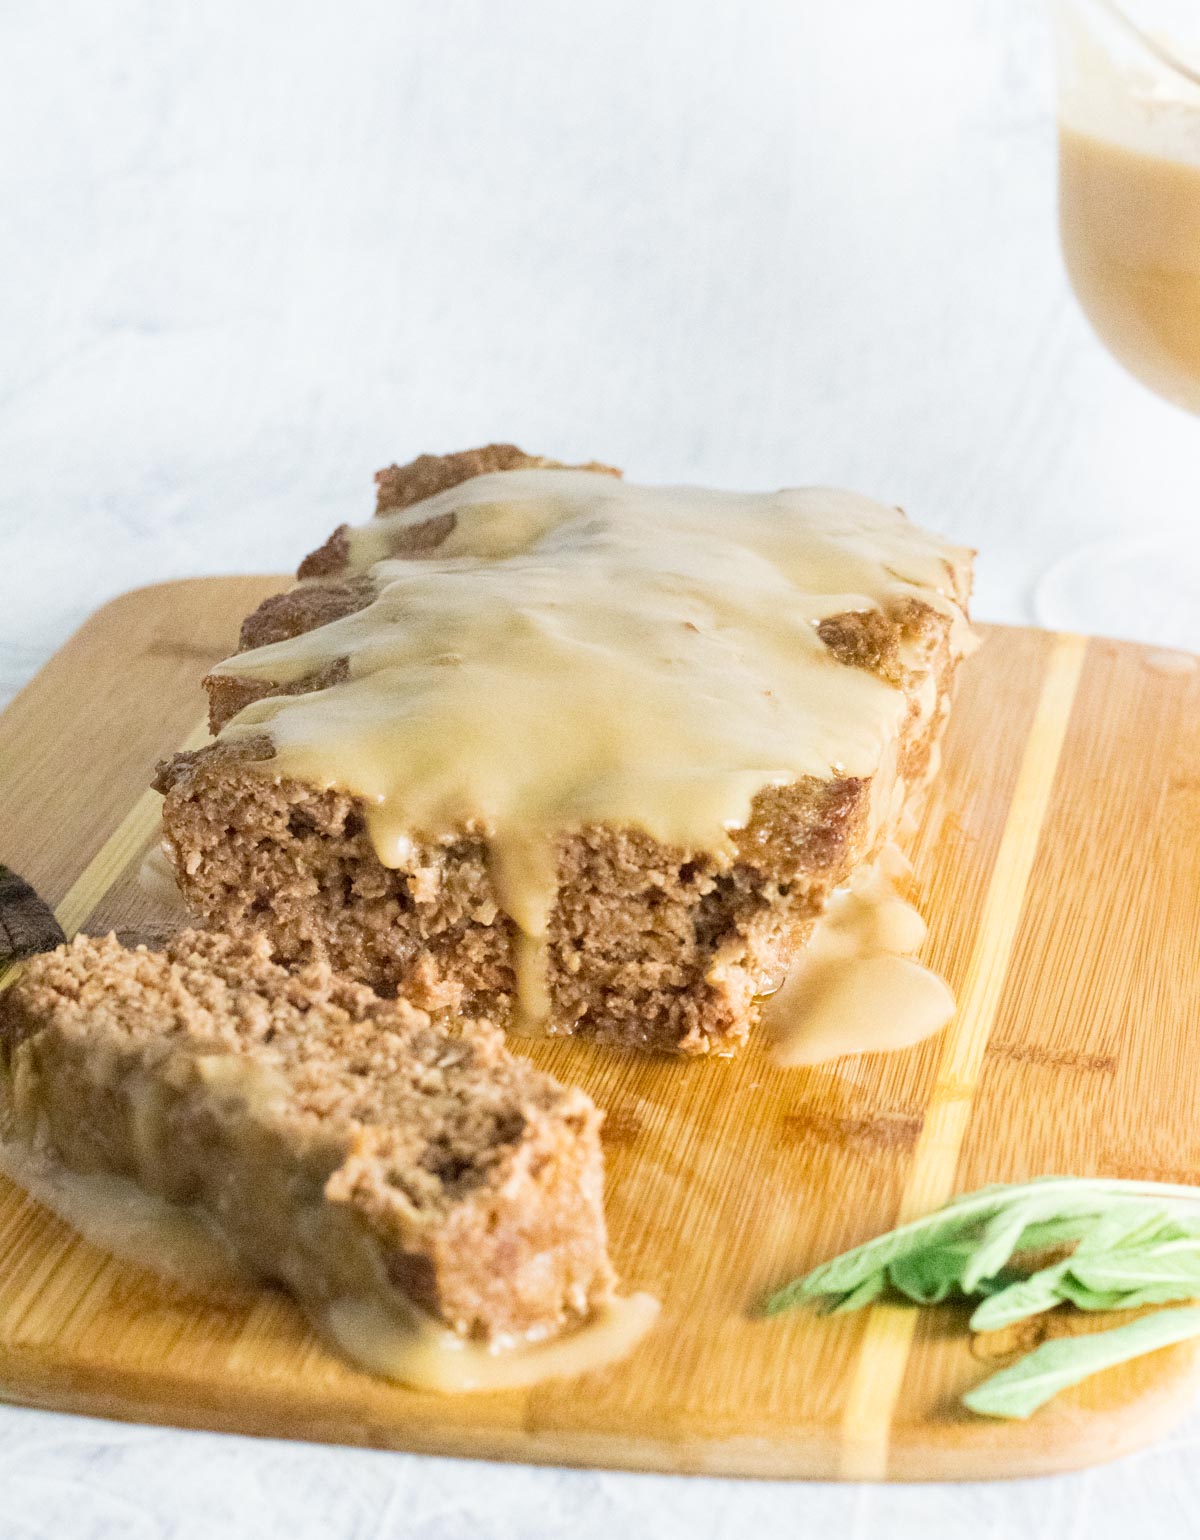 Meatloaf with gravy.